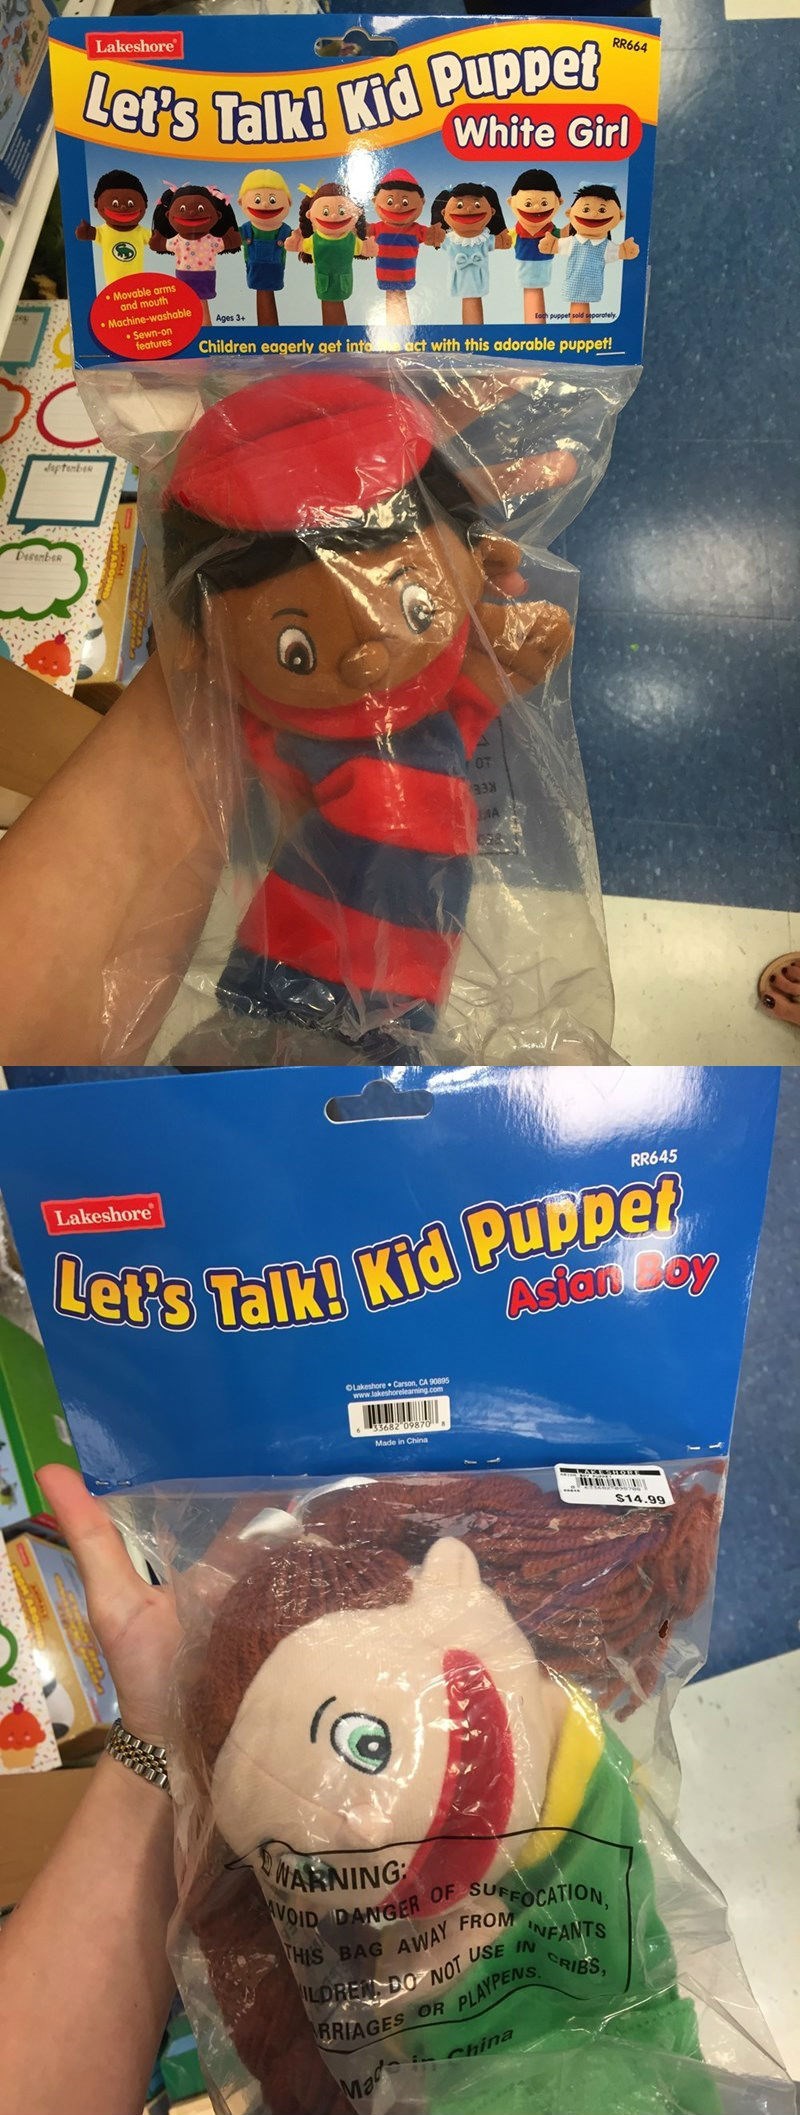 FAIL,race,products,puppets